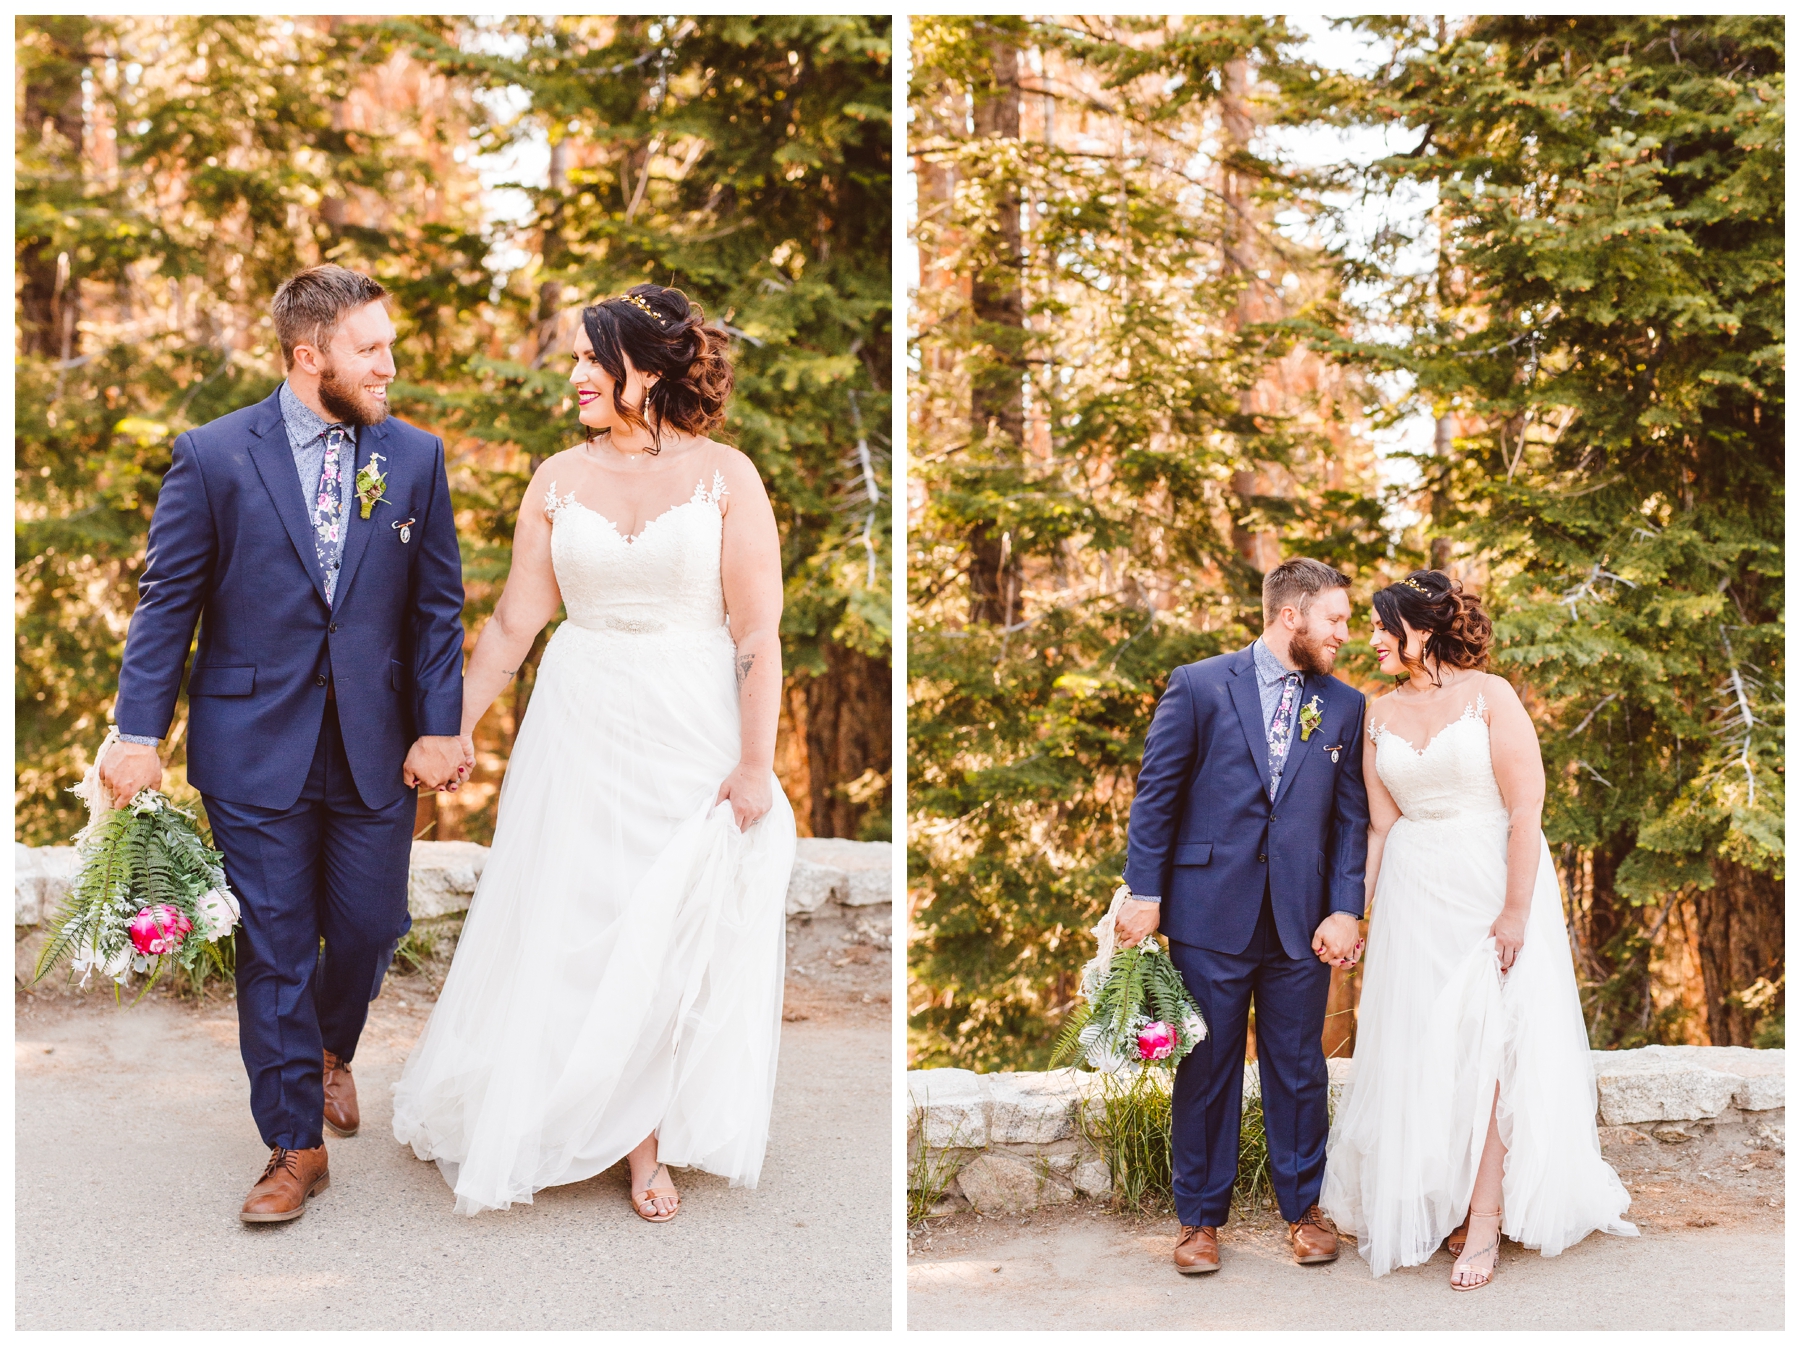 Yosemite National Park - Southern California Elopement and Wedding Inspiration by Brooke Michelle Photography